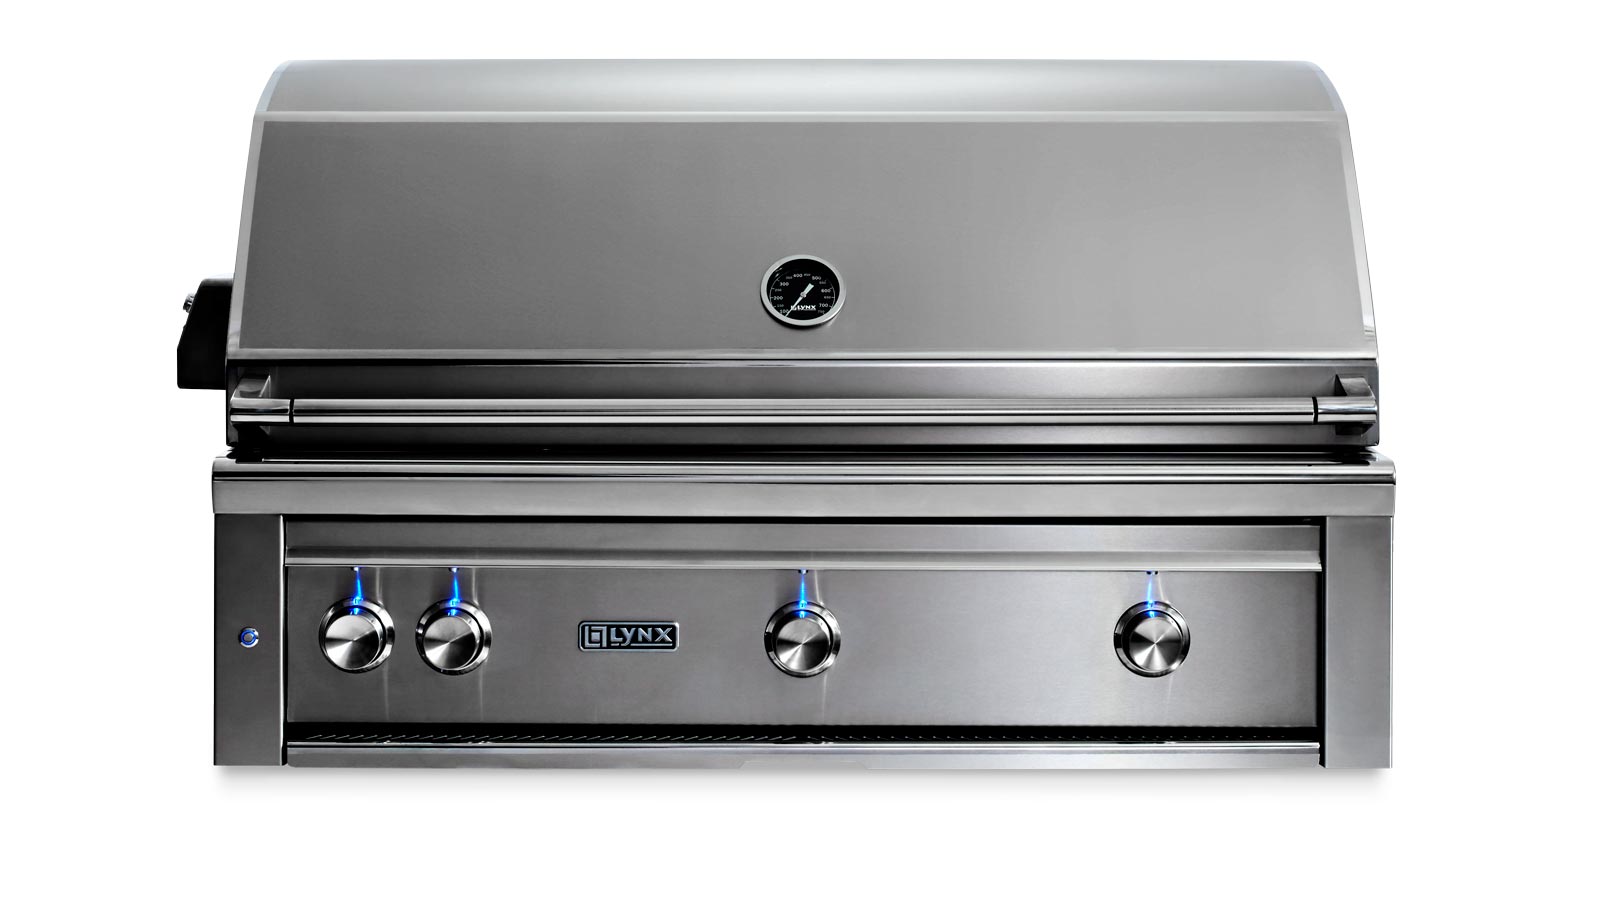 42” Professional Built-In Grill with All Ceramic Burners And Rotisserie